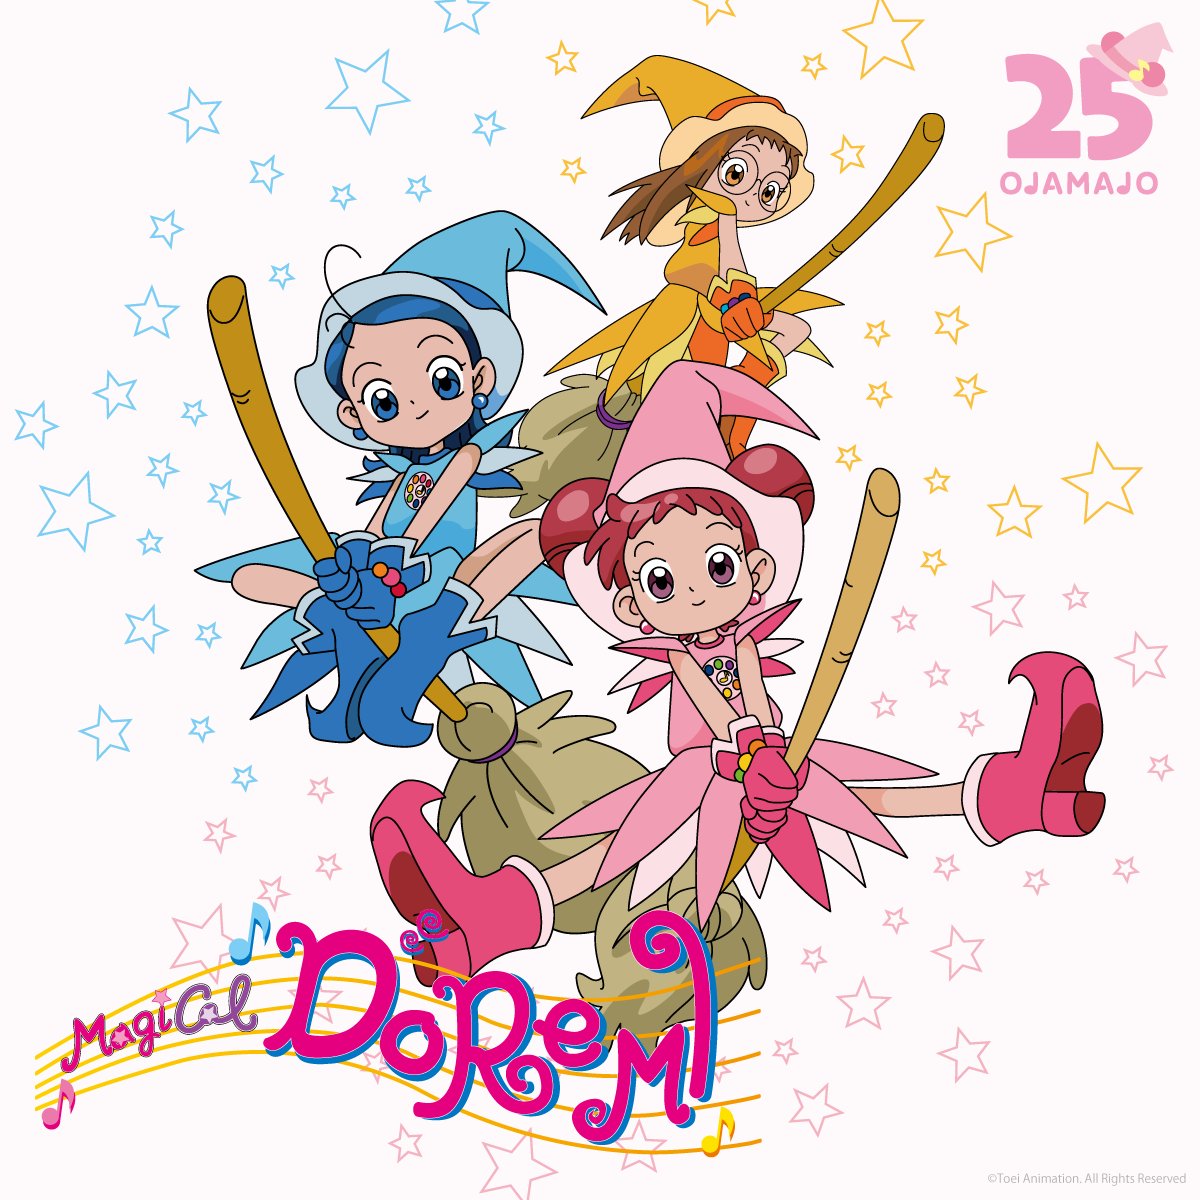 This day 25 years ago, on 7 February 1999, Magical Doremi was broadcast in Japan for the first time !
Happy 25th anniversary🎊🎊🎊

#MagicalDoremi